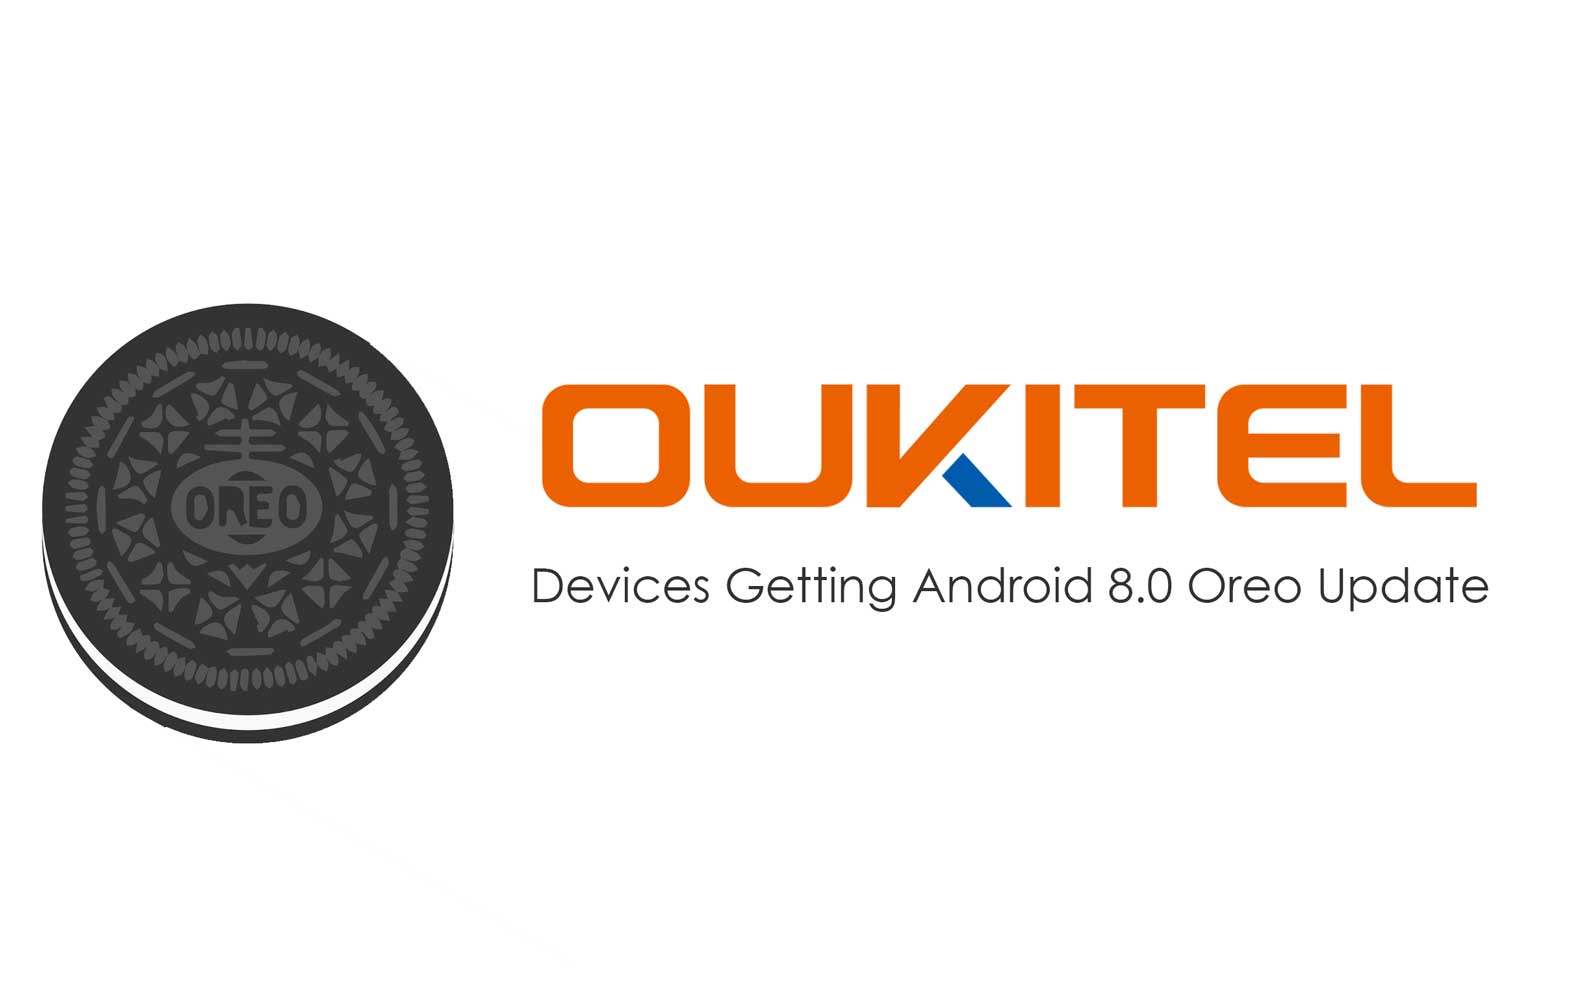 List of Oukitel Devices Getting Android 8.0 Oreo Update